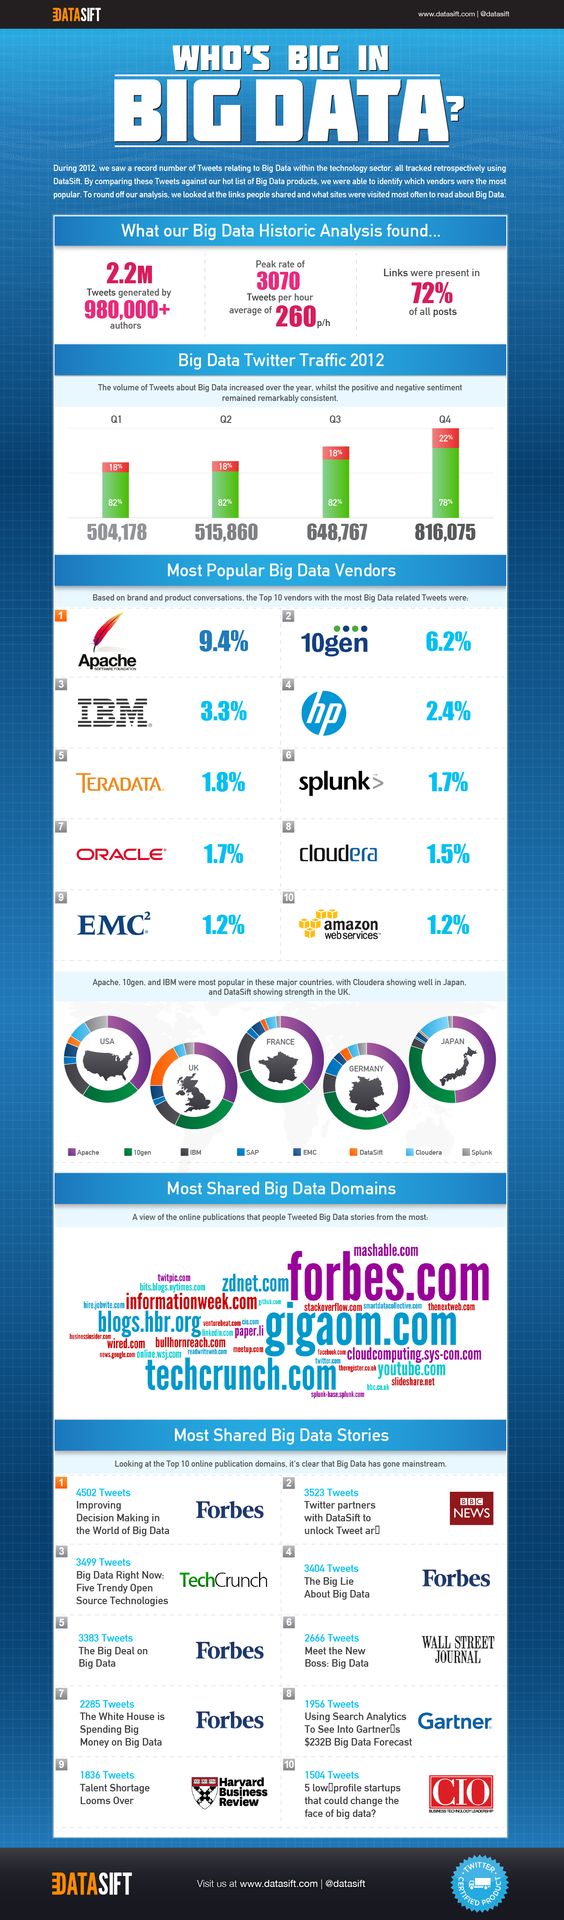 Who’s Big in Big Data? (Infographic)